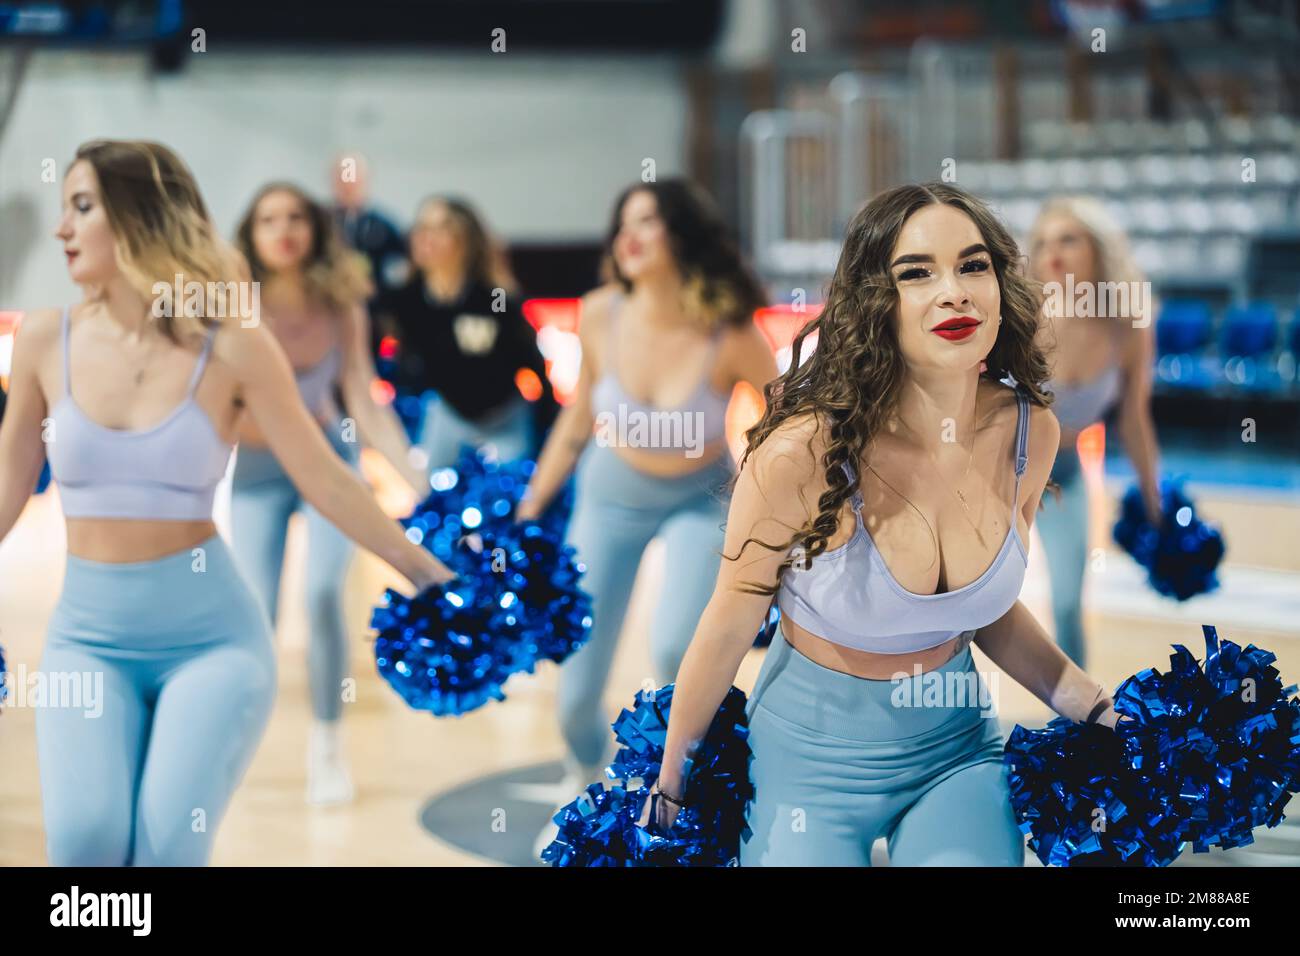 Attractive cheerleaders are dancing with energy and enthusiasm in revealing outfits. They're holding bright blue pom-poms to support their team. Stock Photo